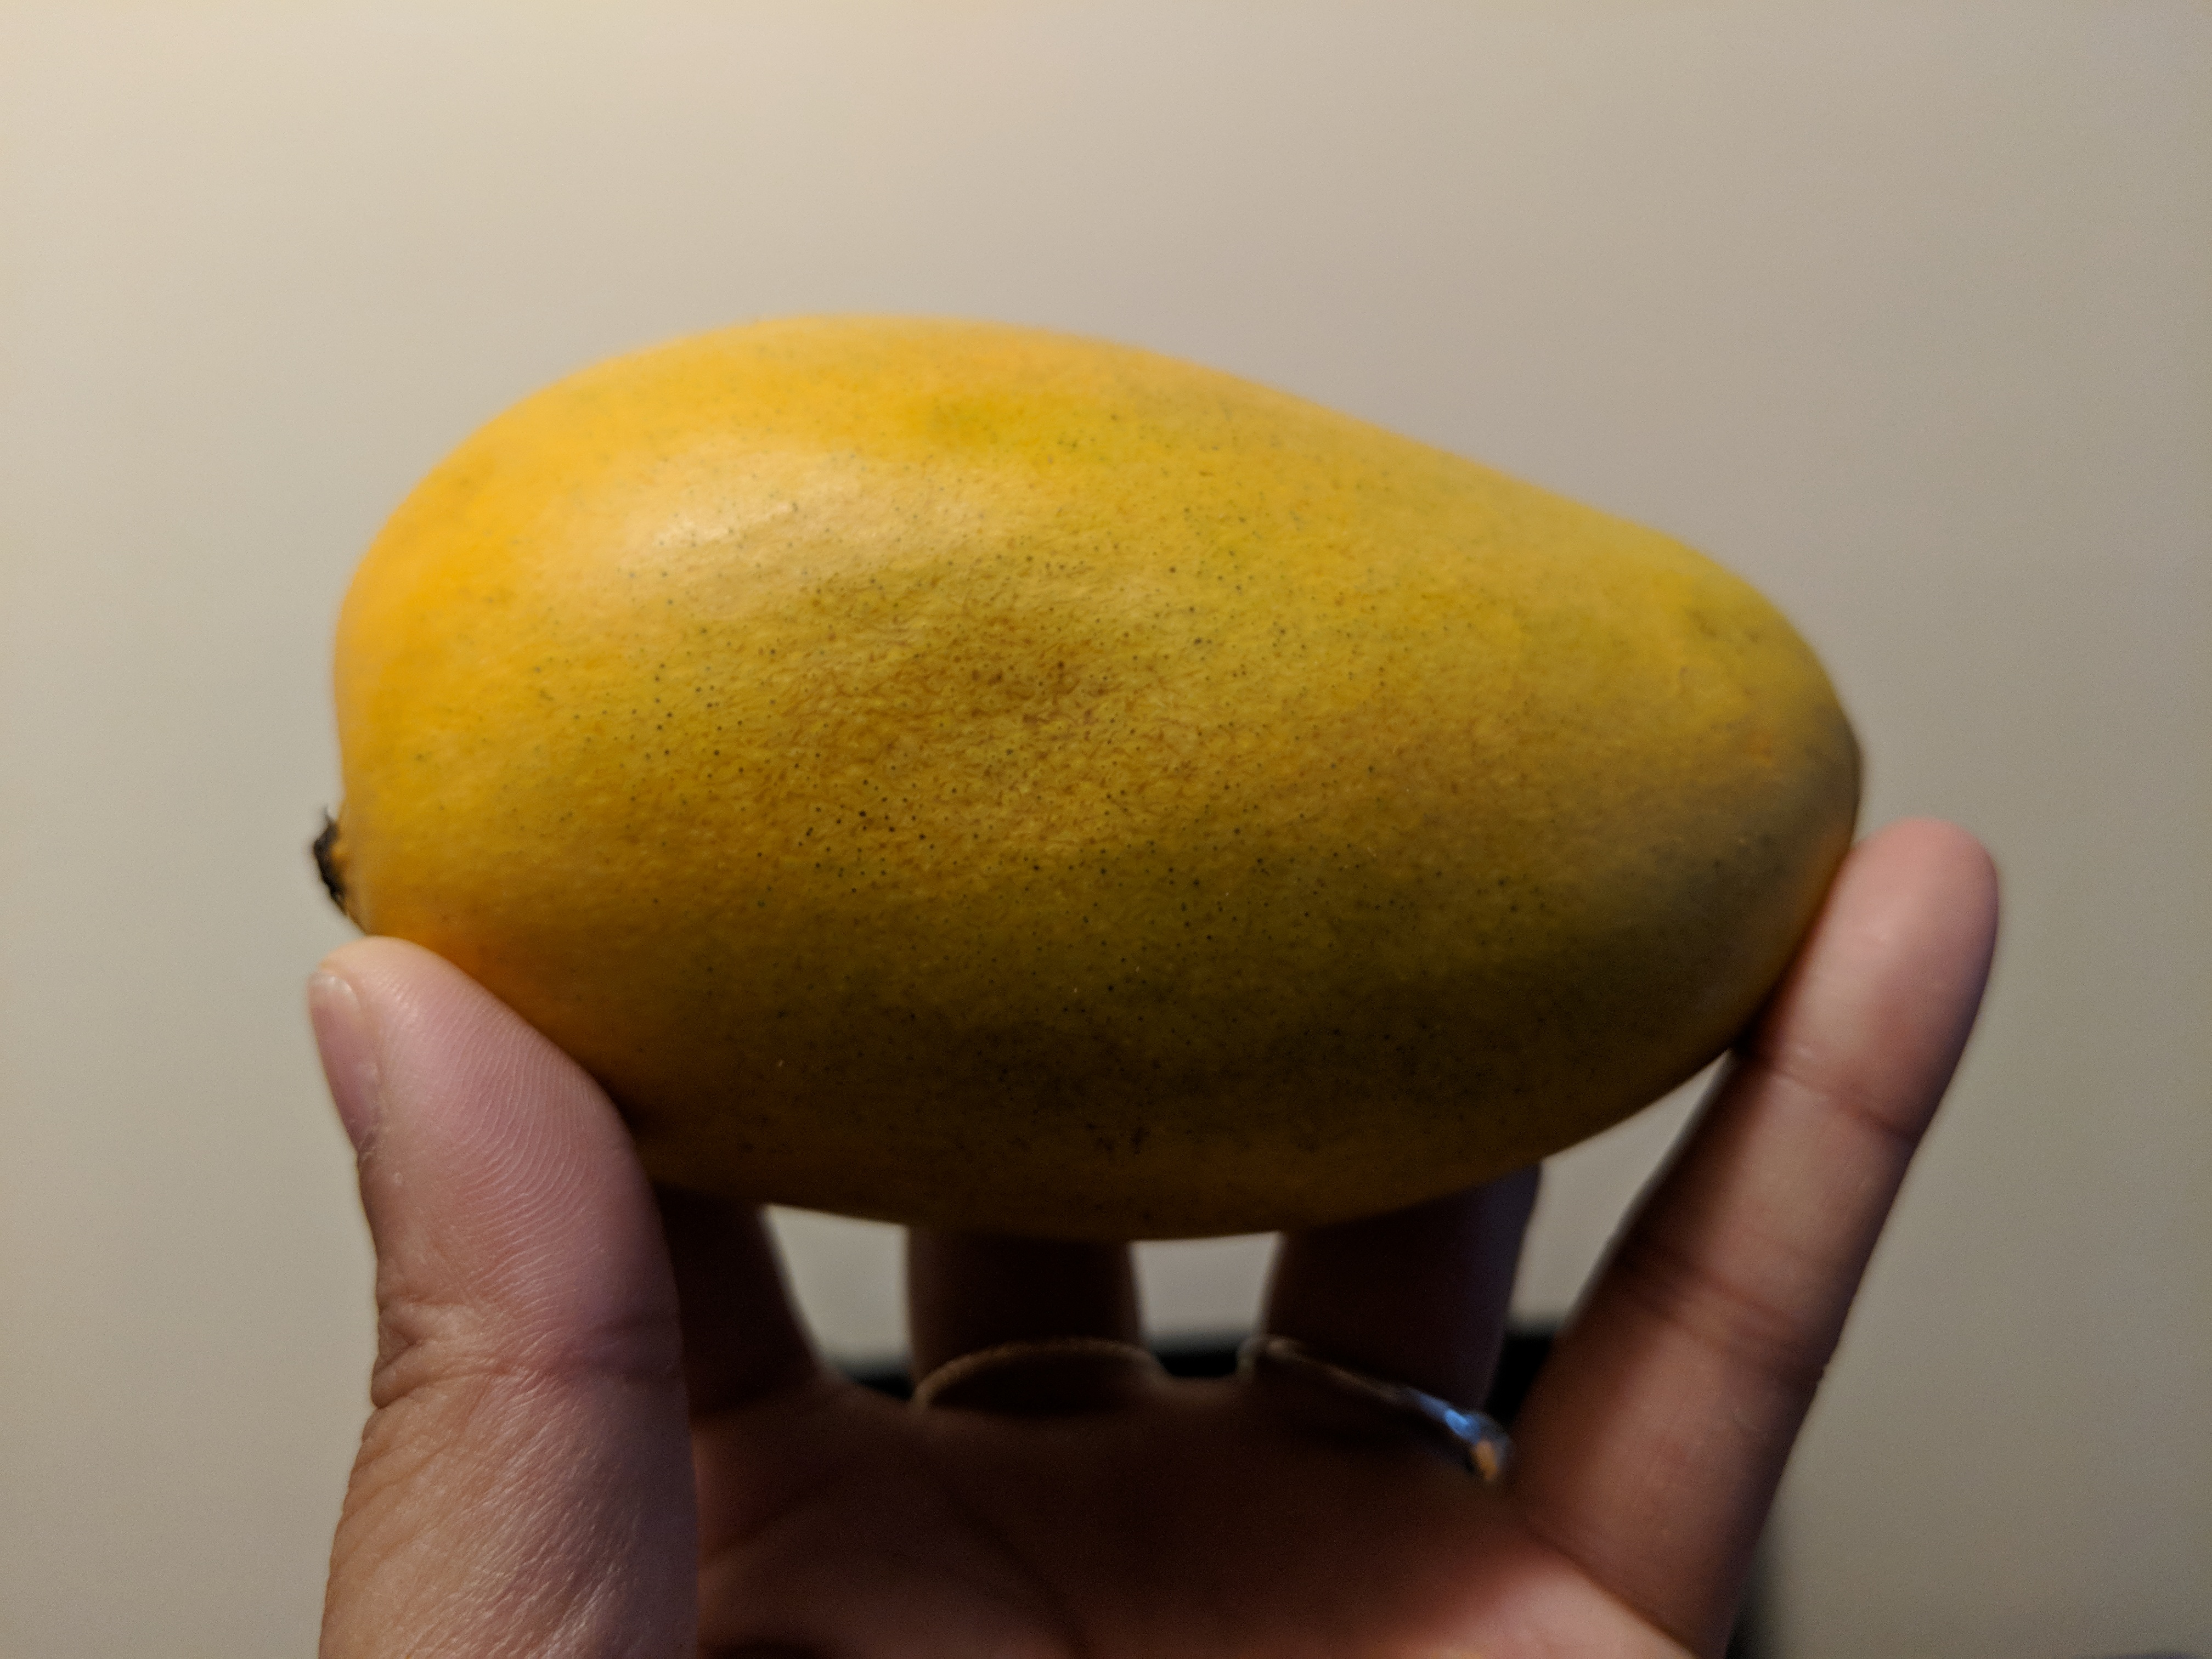 Imperfect Produce Box Review and Reveal - Mango